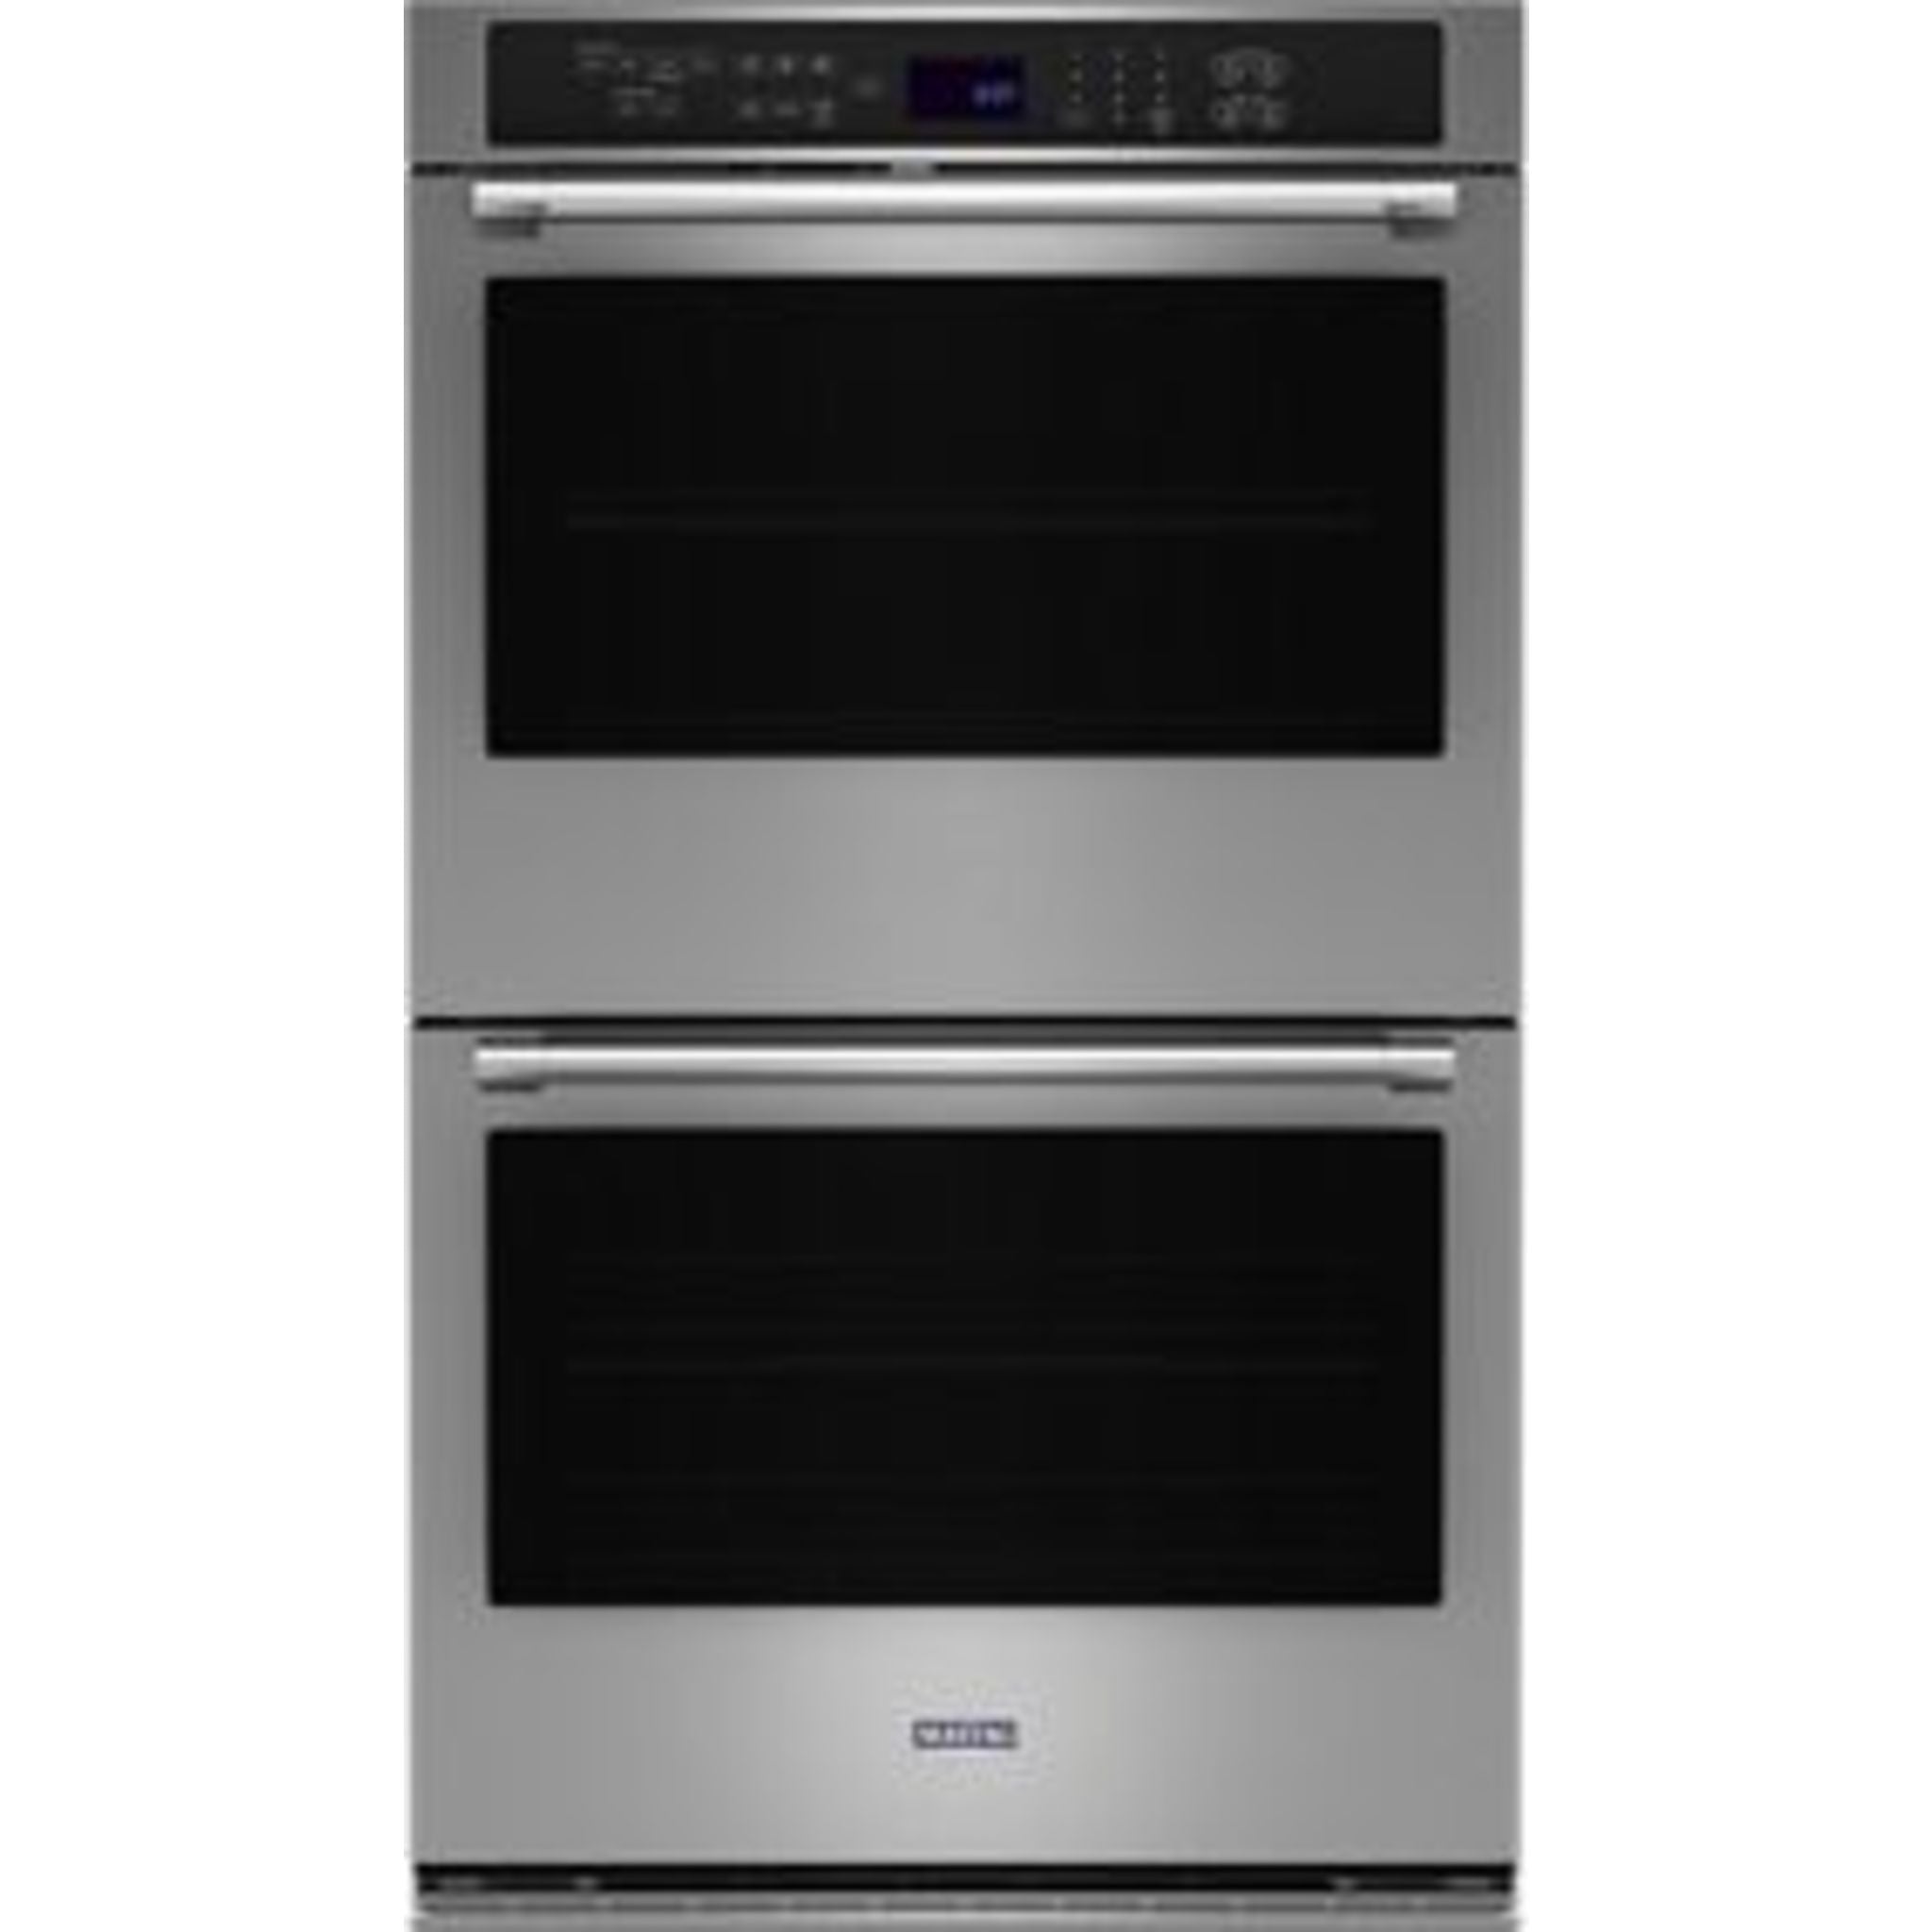 Maytag, Maytag 30" True Convection Wall Oven (MOED6030LZ) - Fingerprint Resistant Stainless Steel